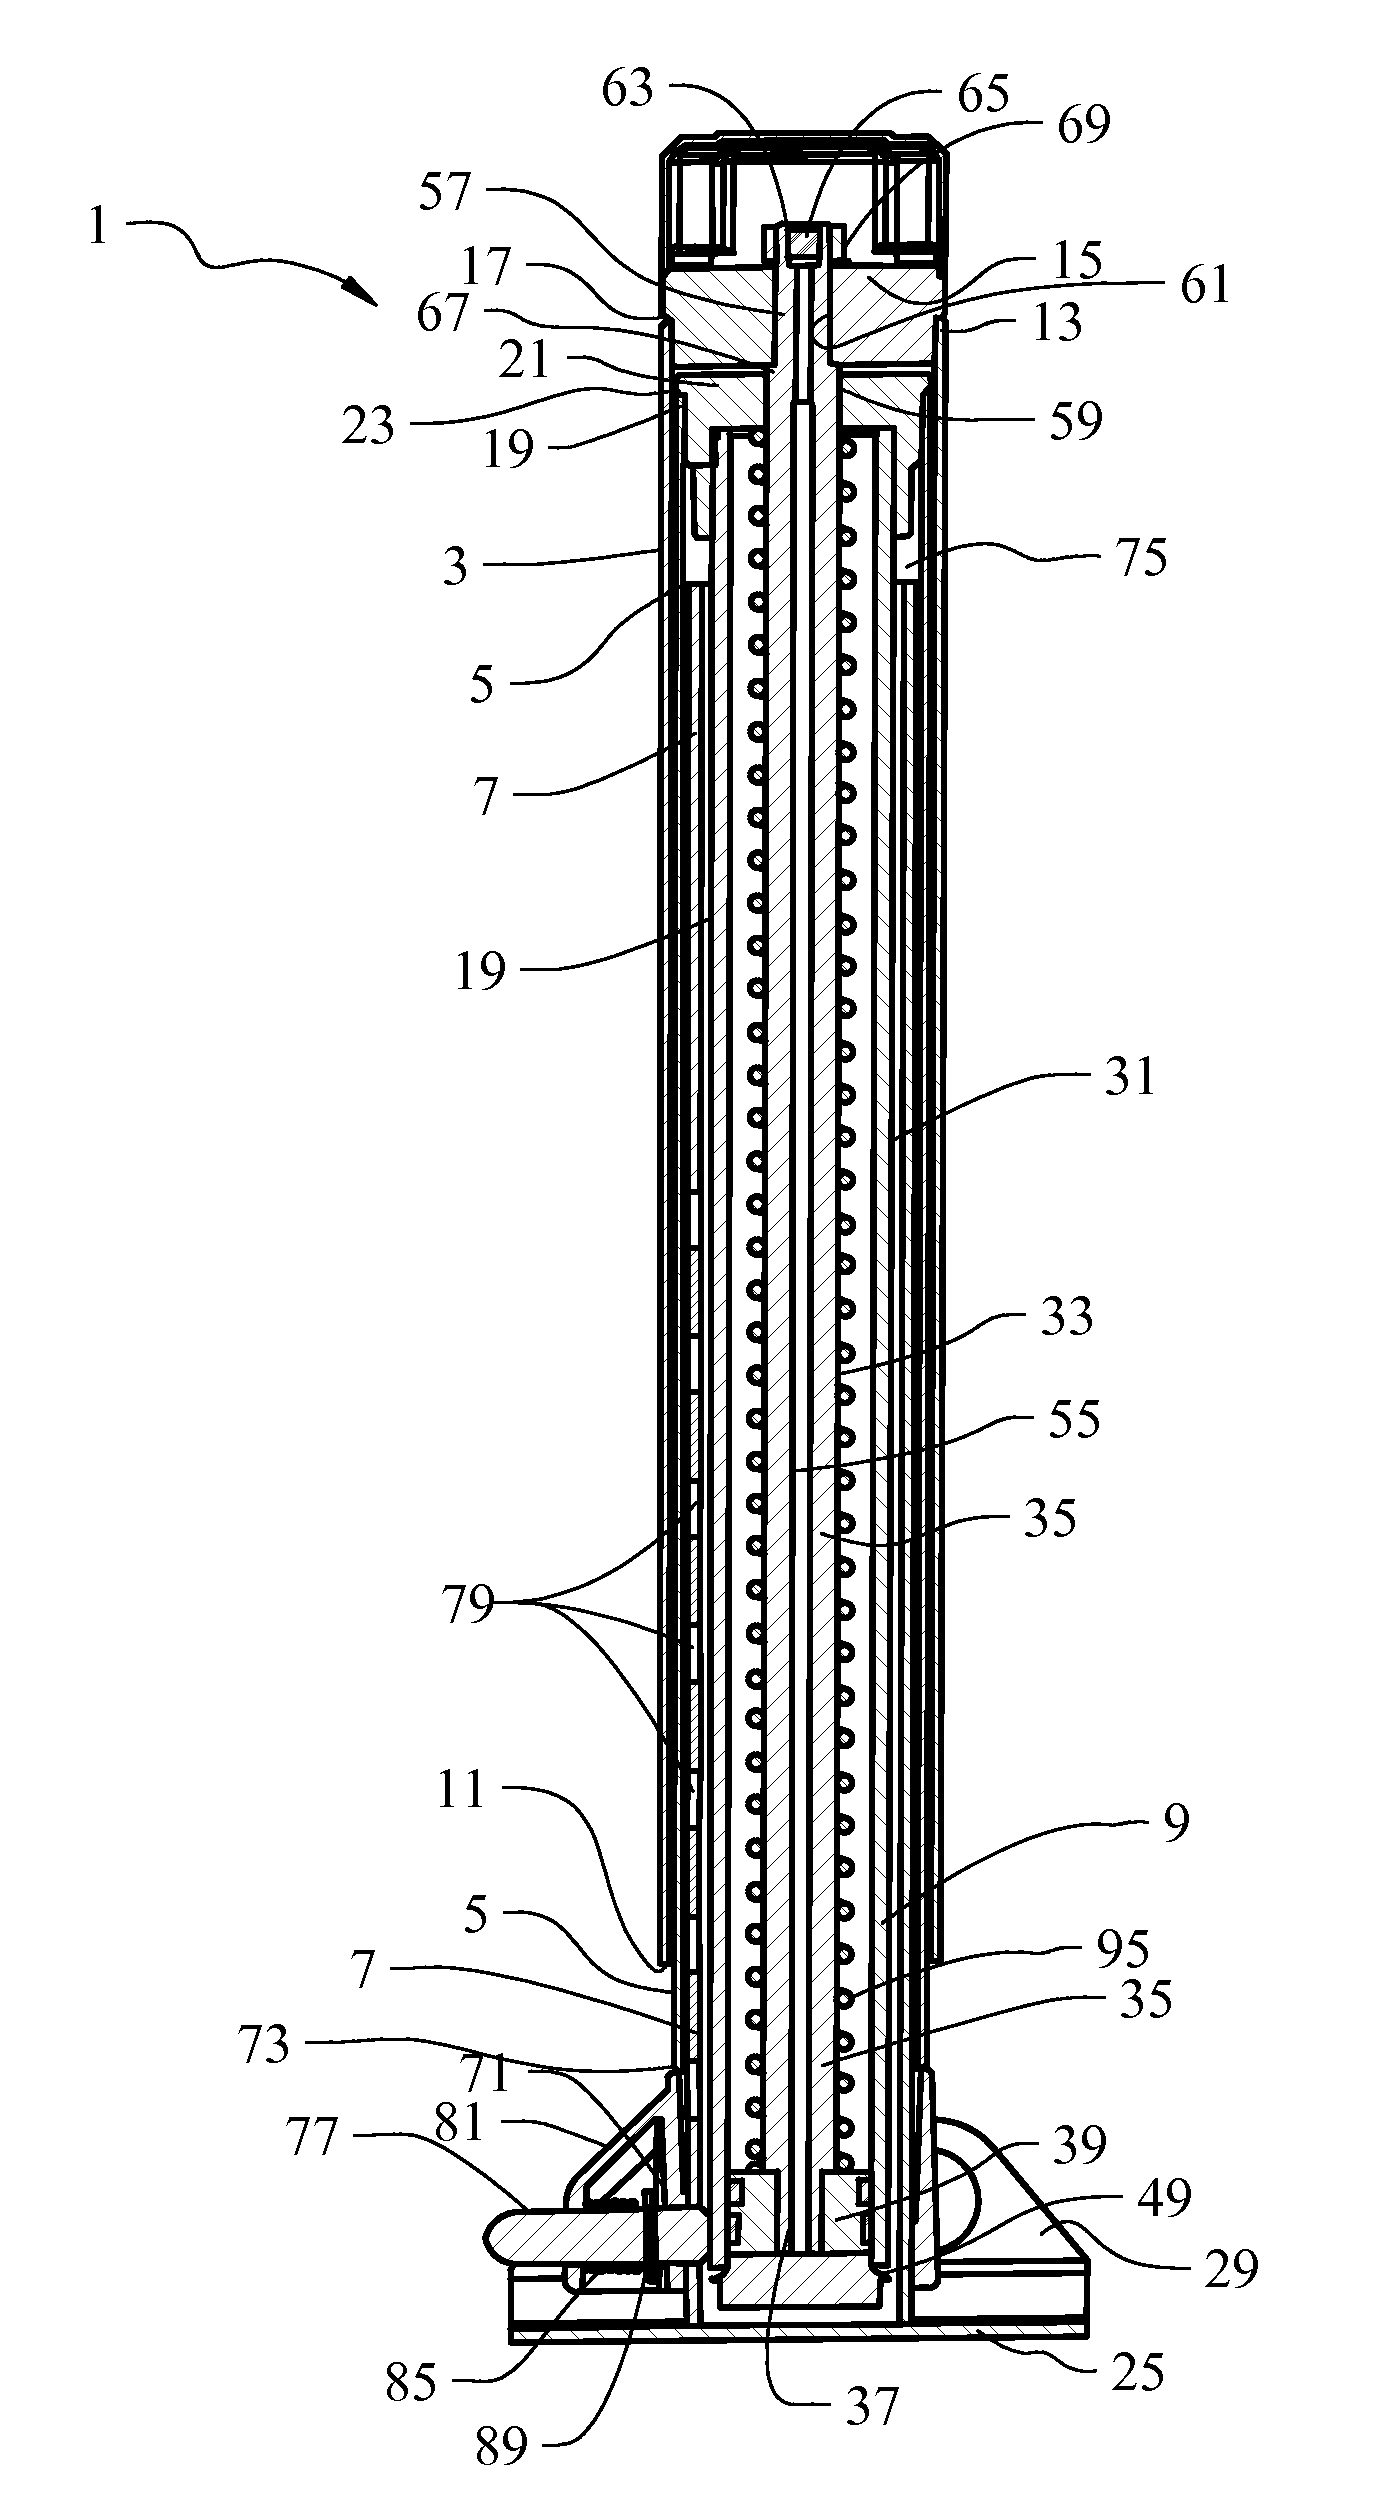 Self-retracting hydraulic jack assembly